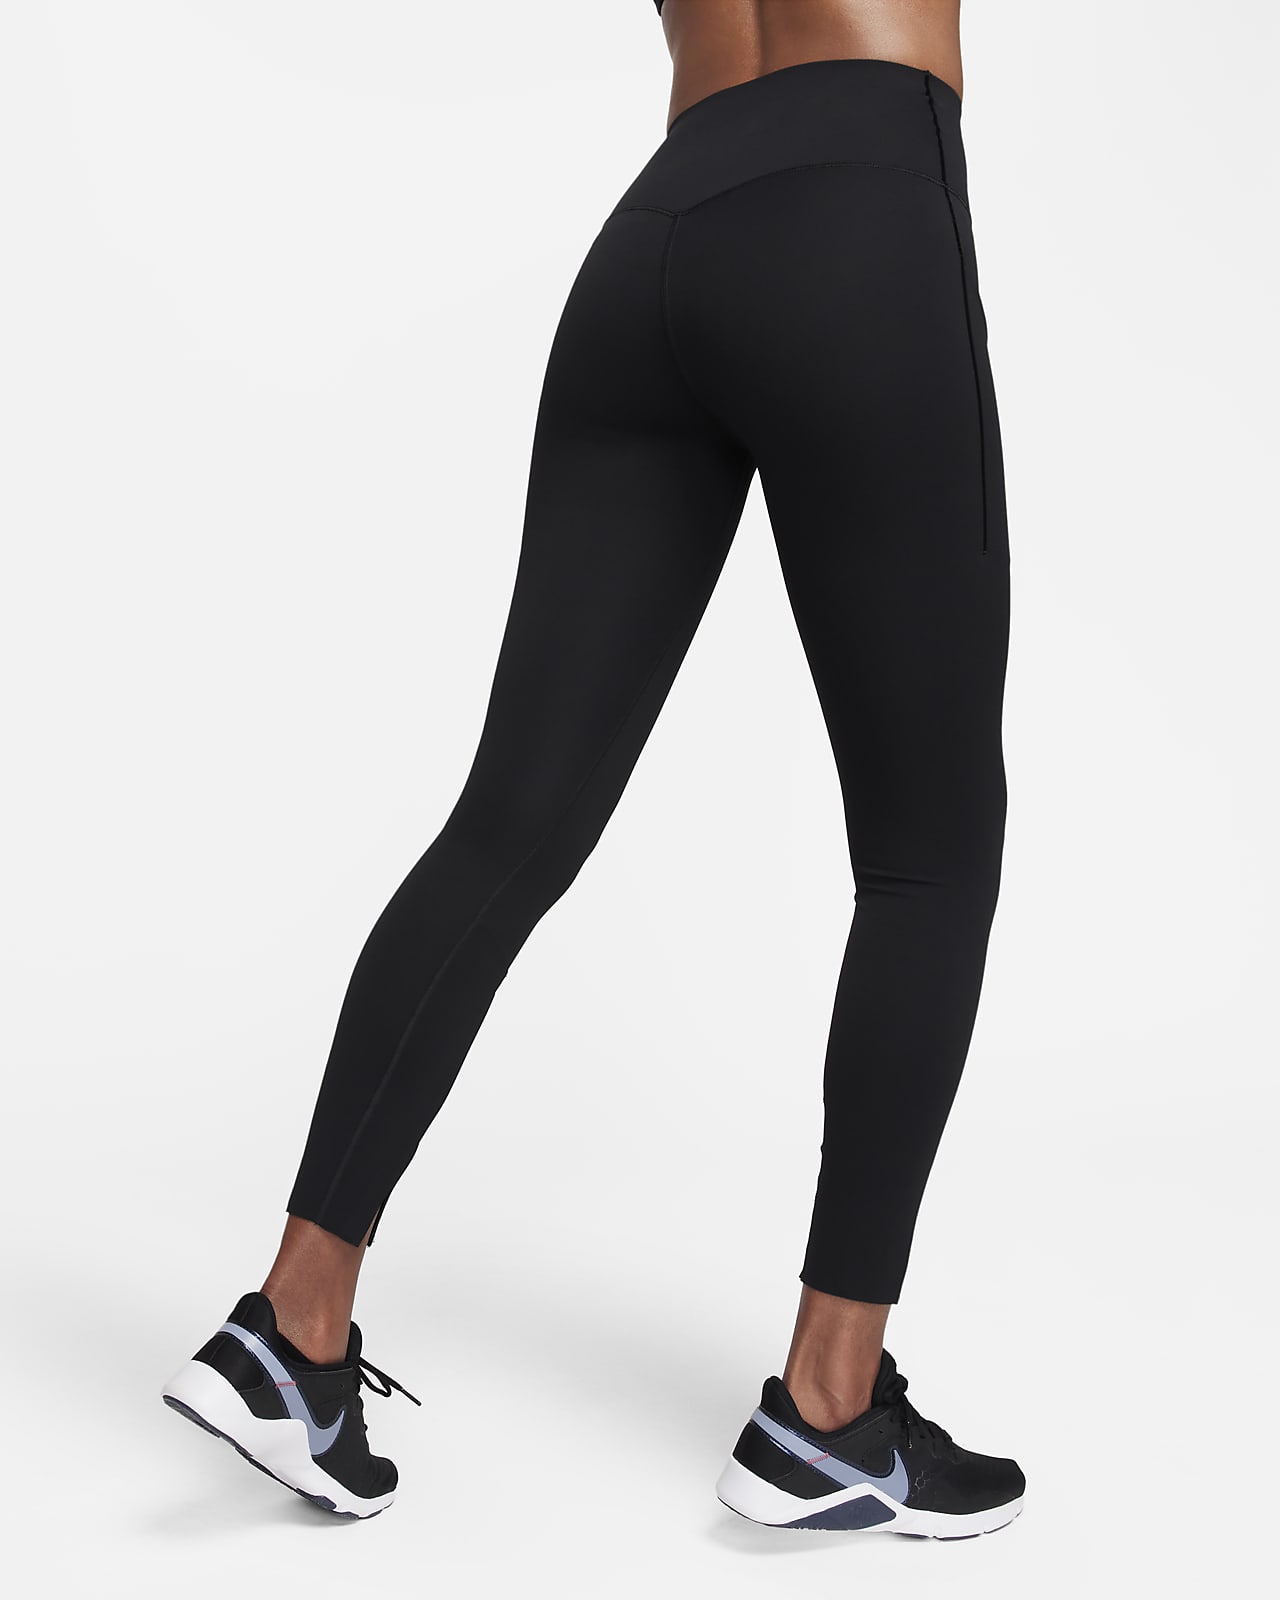 The best Nike leggings for support and compression. Nike RO